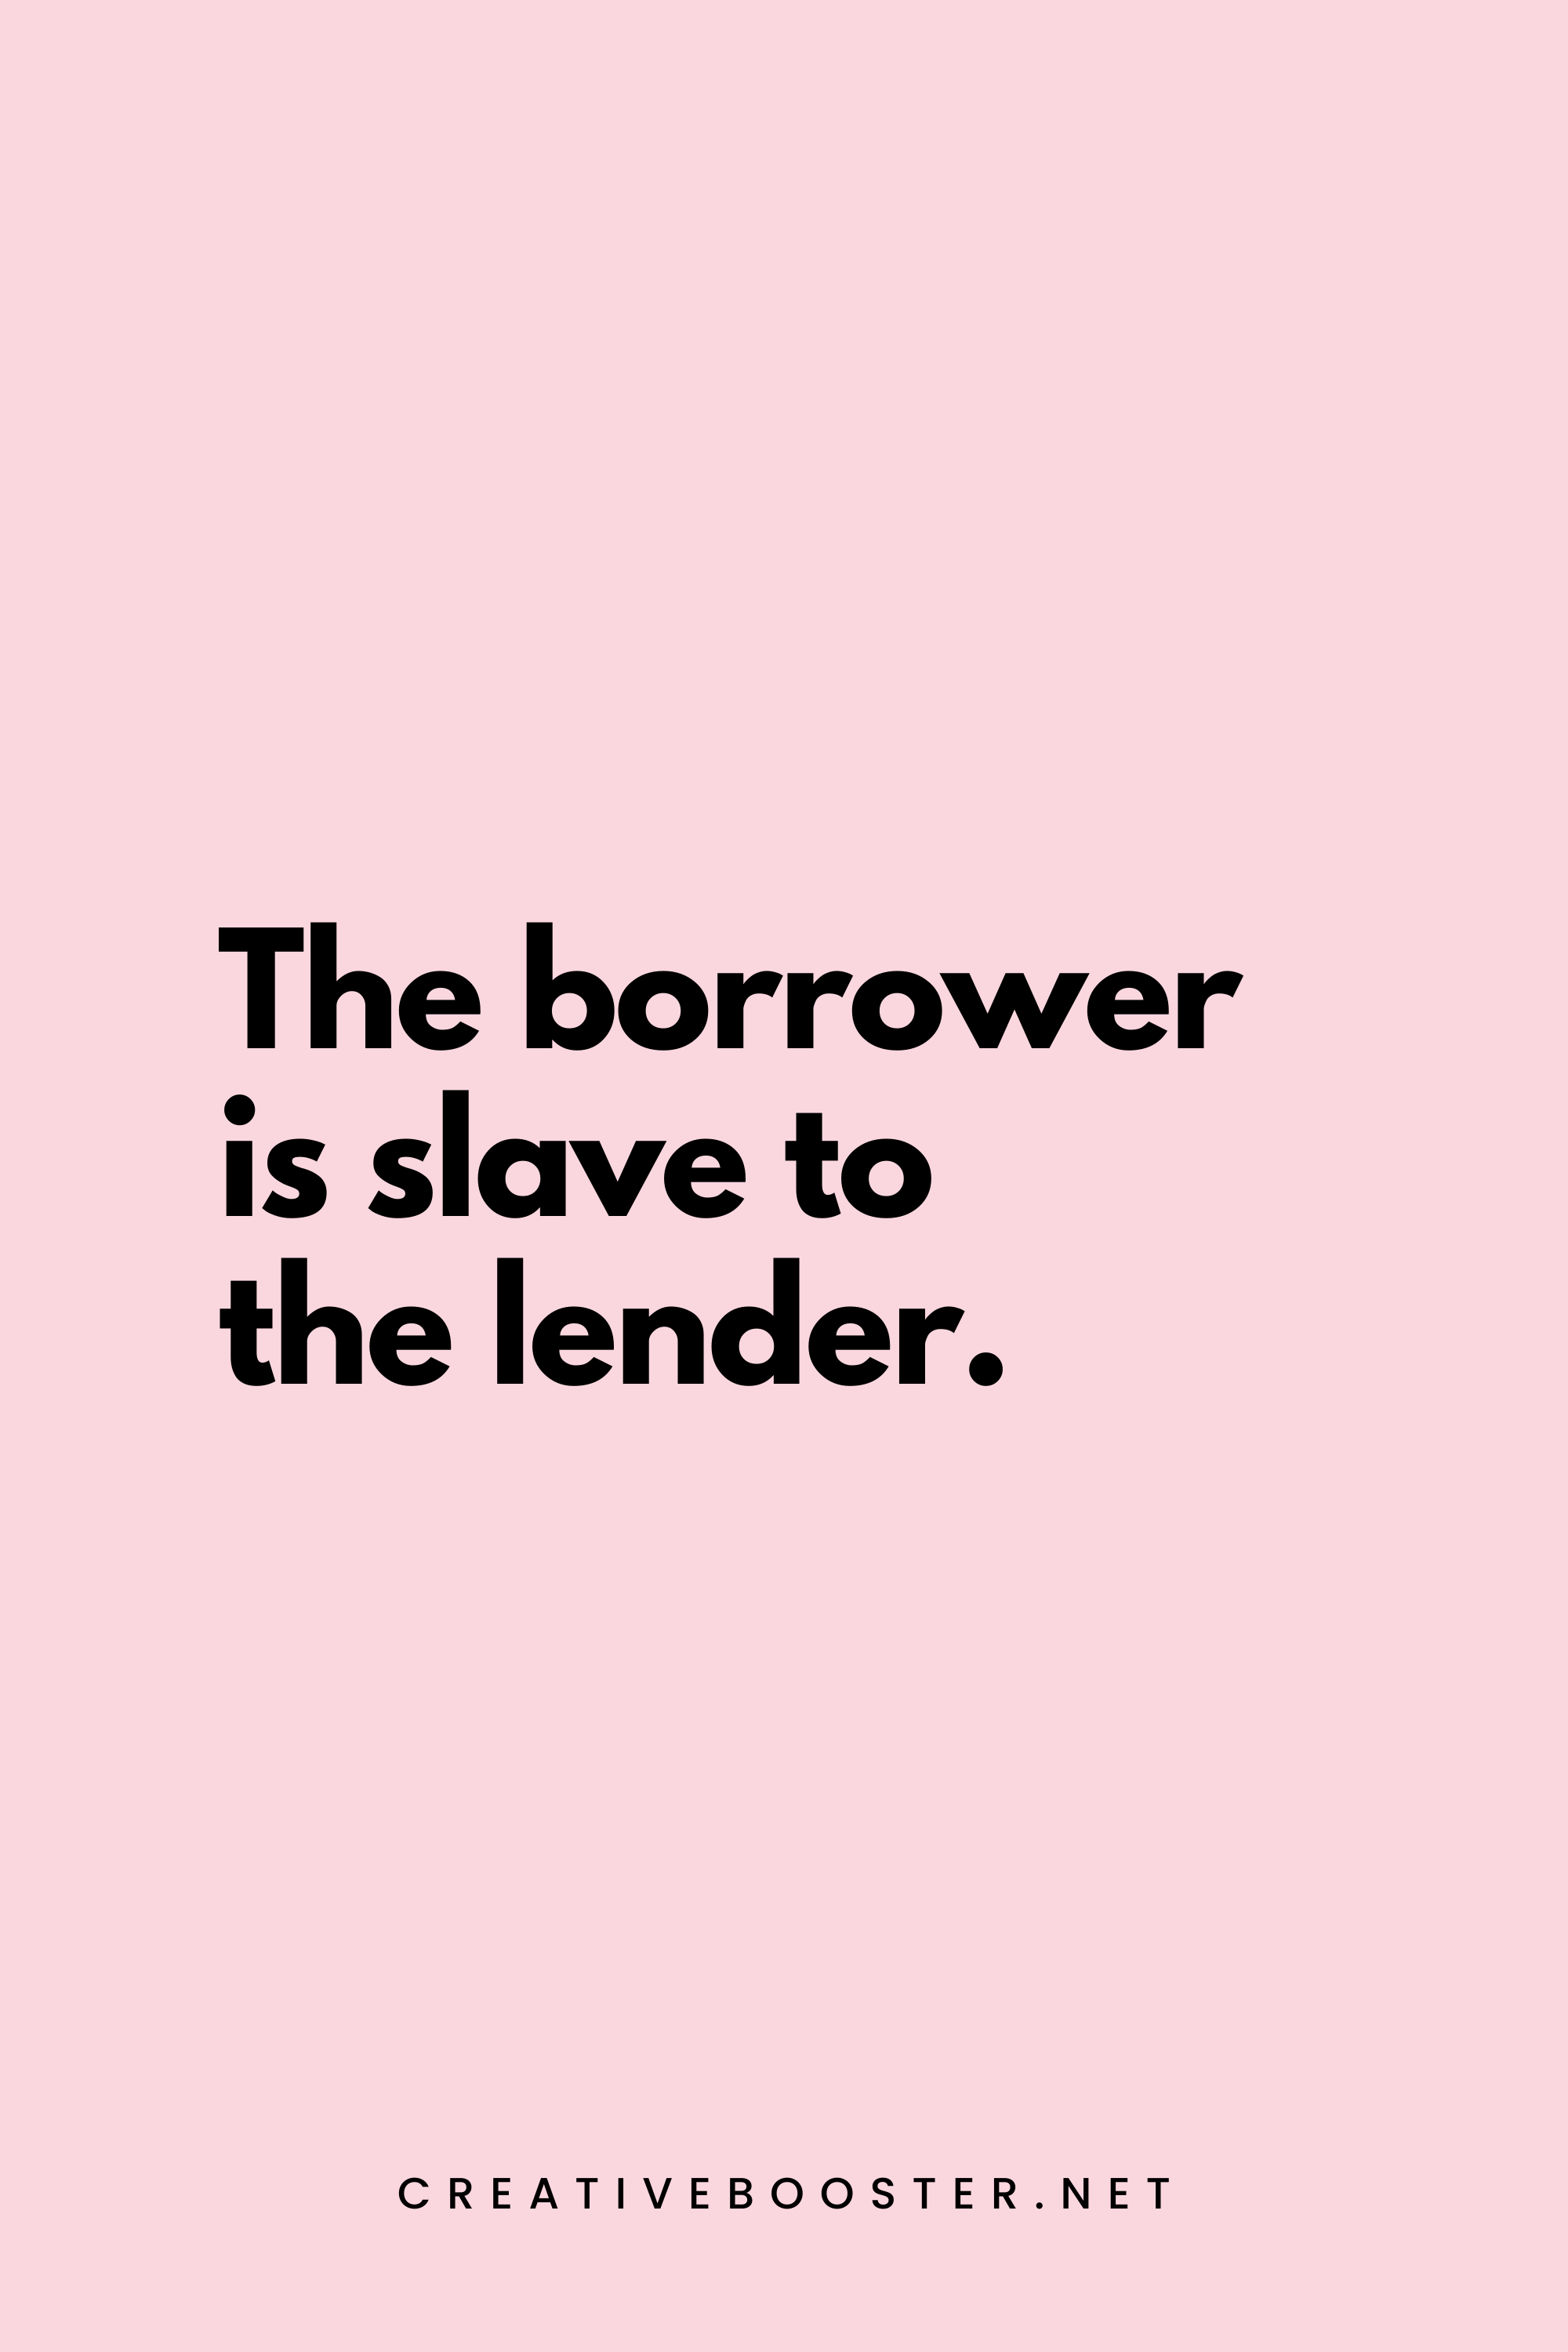 47. The borrower is slave to the lender. - Proverbs 22:7 - 5.